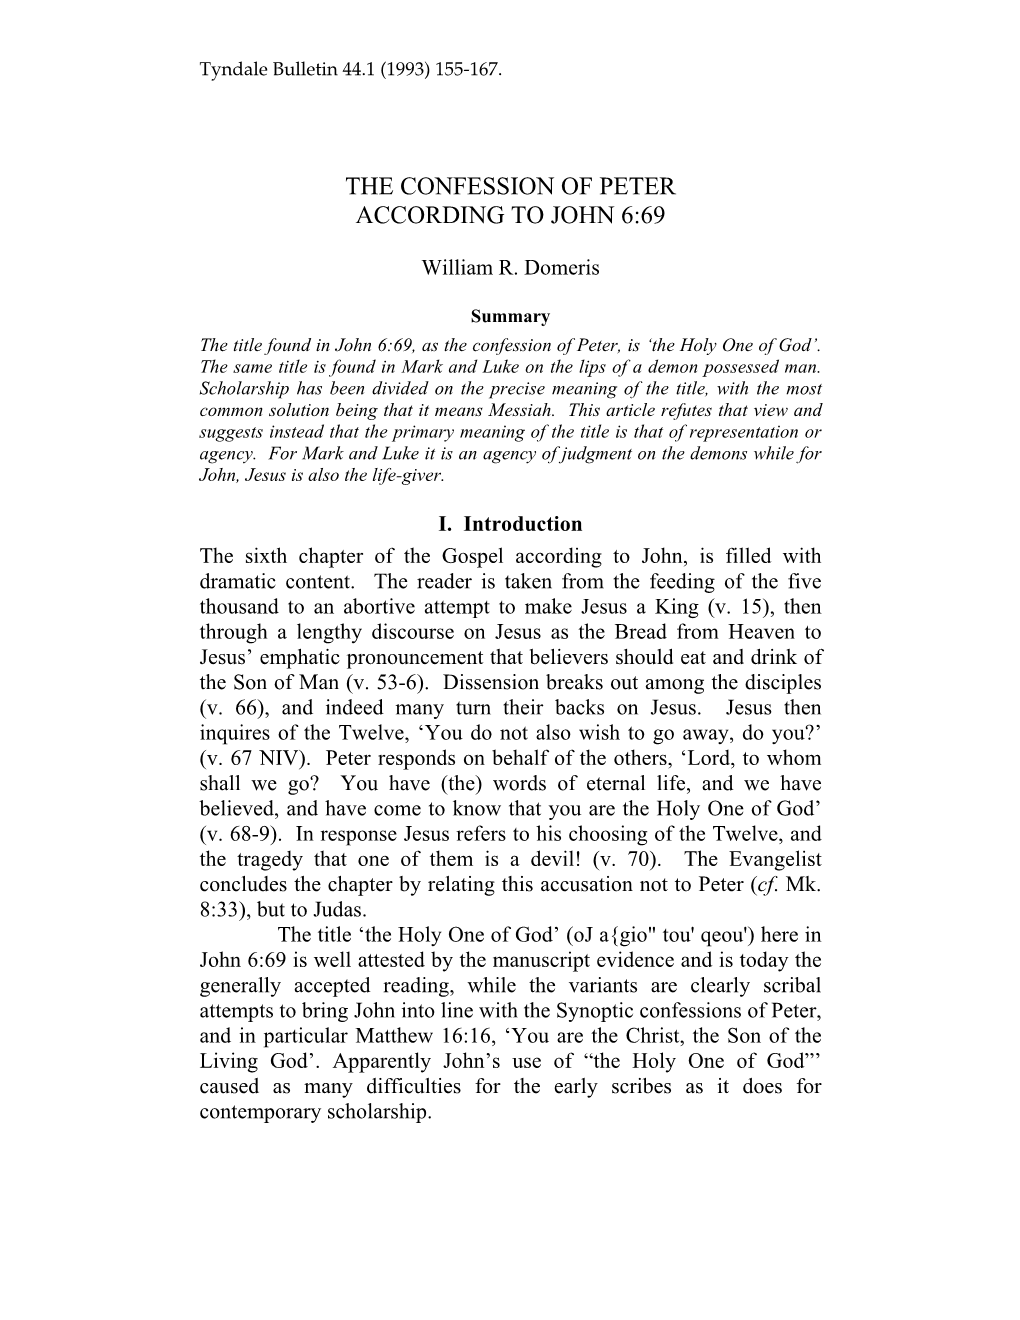 The Confession of Peter According to John 6:69